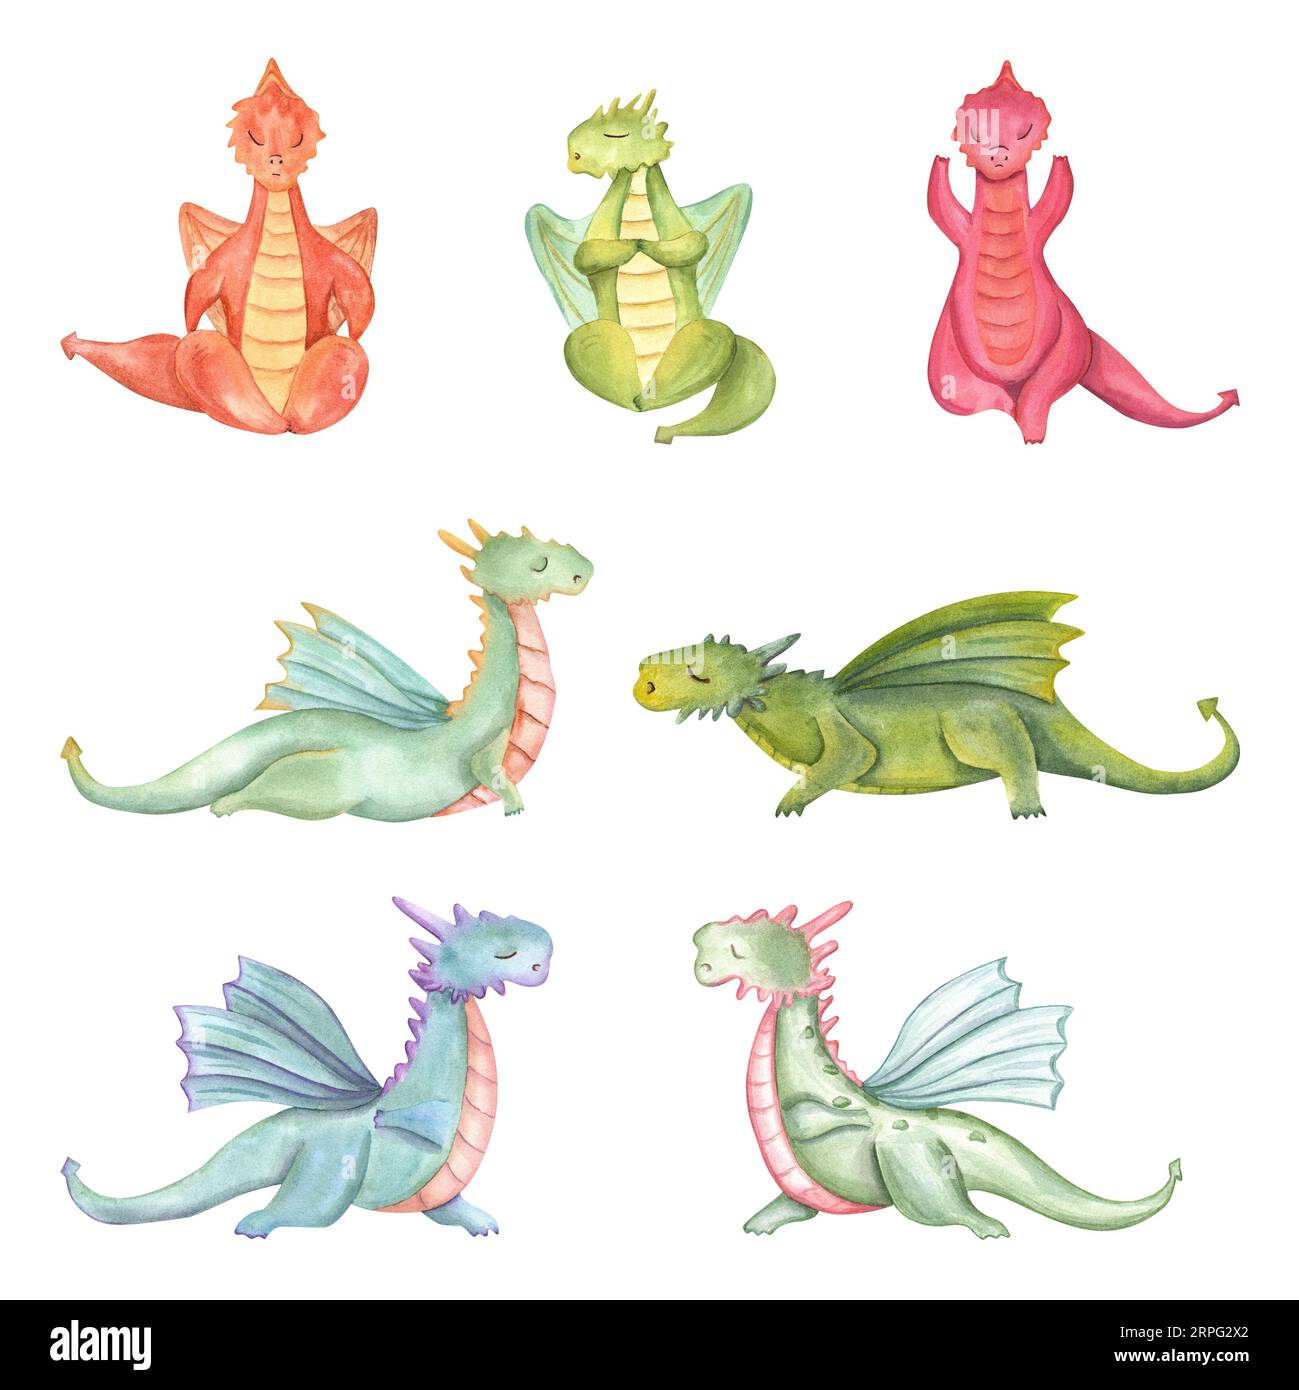 Set of stylish cartoon Dragons in various poses of yoga. Animal meditation. Colored Dragons practicing fitness exercises. Watercolor illustration Stock Photo